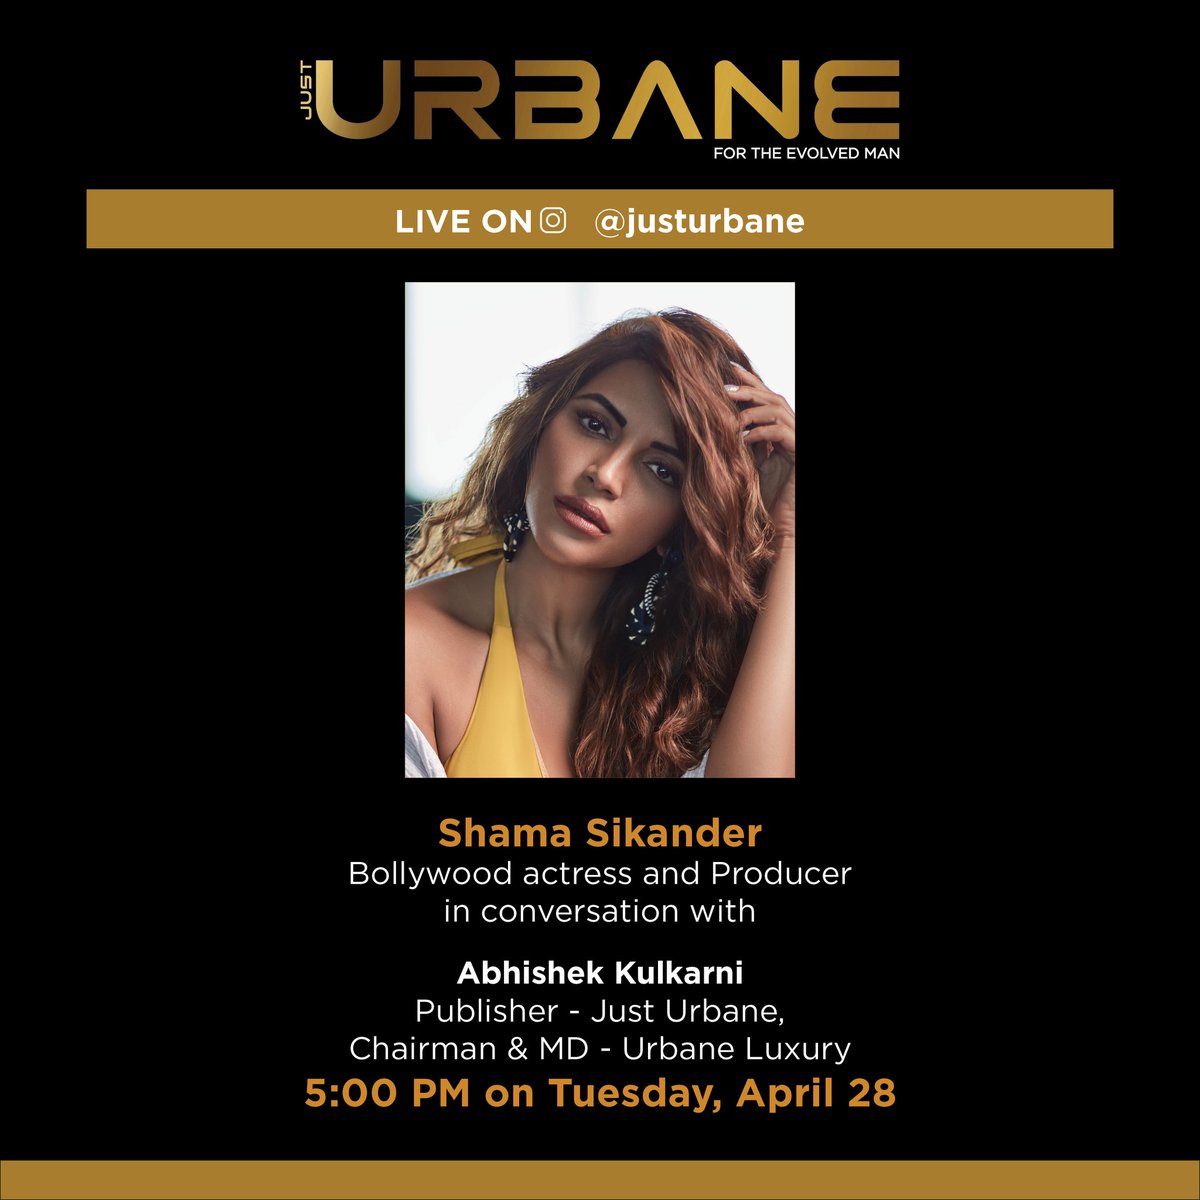 Bollywood actress and producer Shama Sikandar (@shamasikander) live in conversation with @theabhikulkarni at 5pm on 28th April.
Follow our instagram page @justurbane to join the live conversation.

@UrbaneJets

#justurbane #evolvedman #shamasikandar #instalive #actress #producer